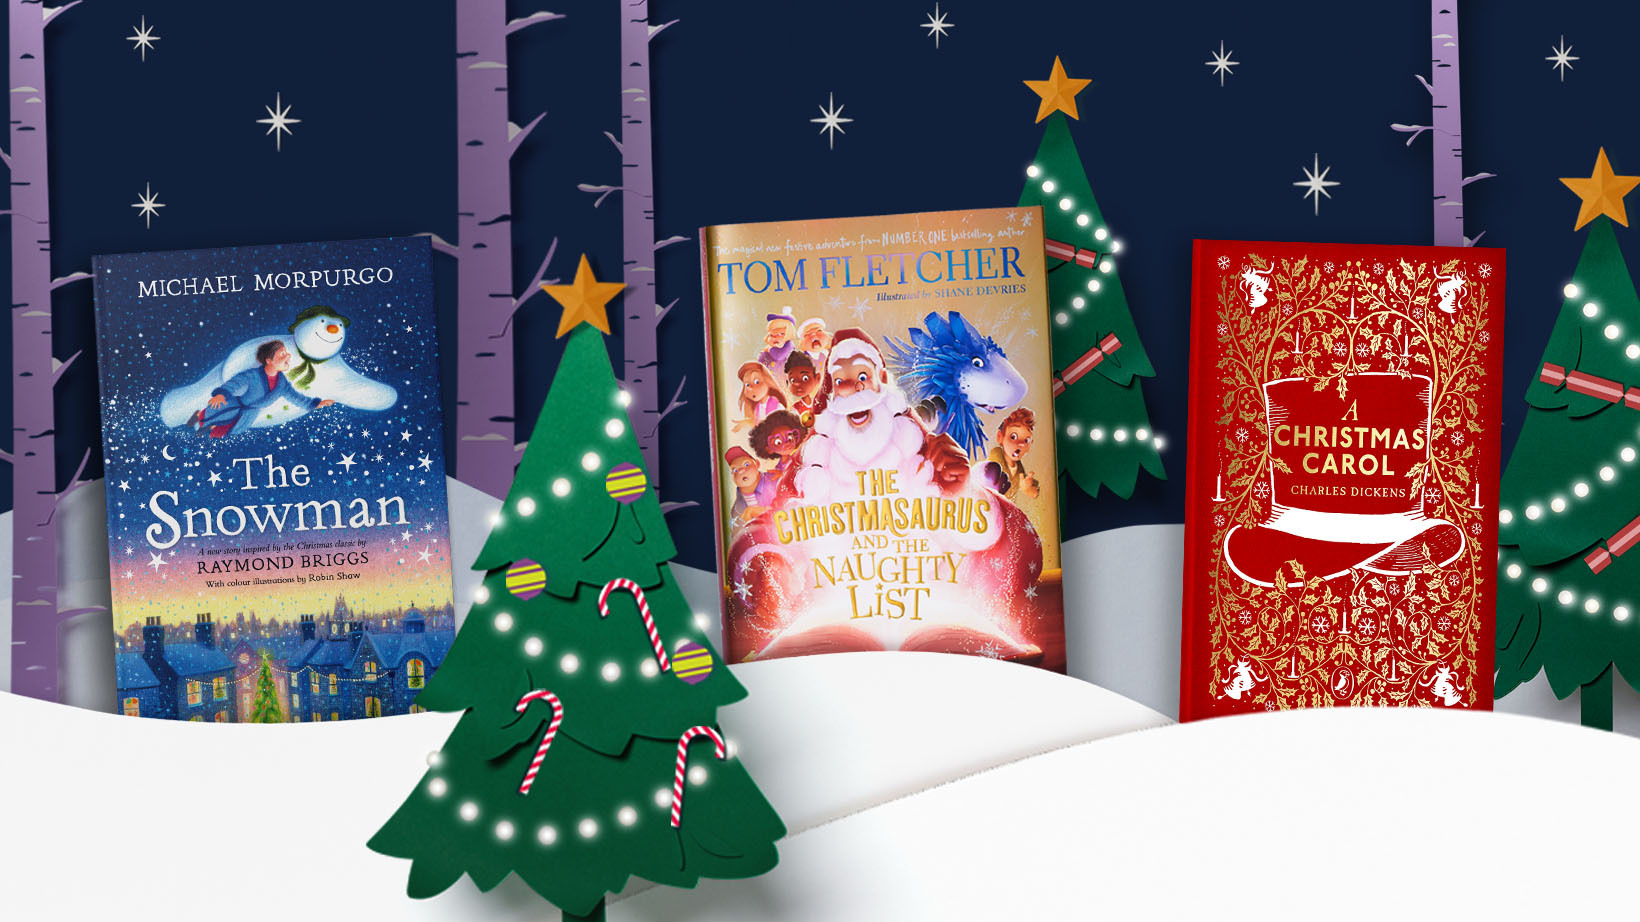 A picture of three Christmas books for children on a snowy background with Christmas trees in the foreground and background